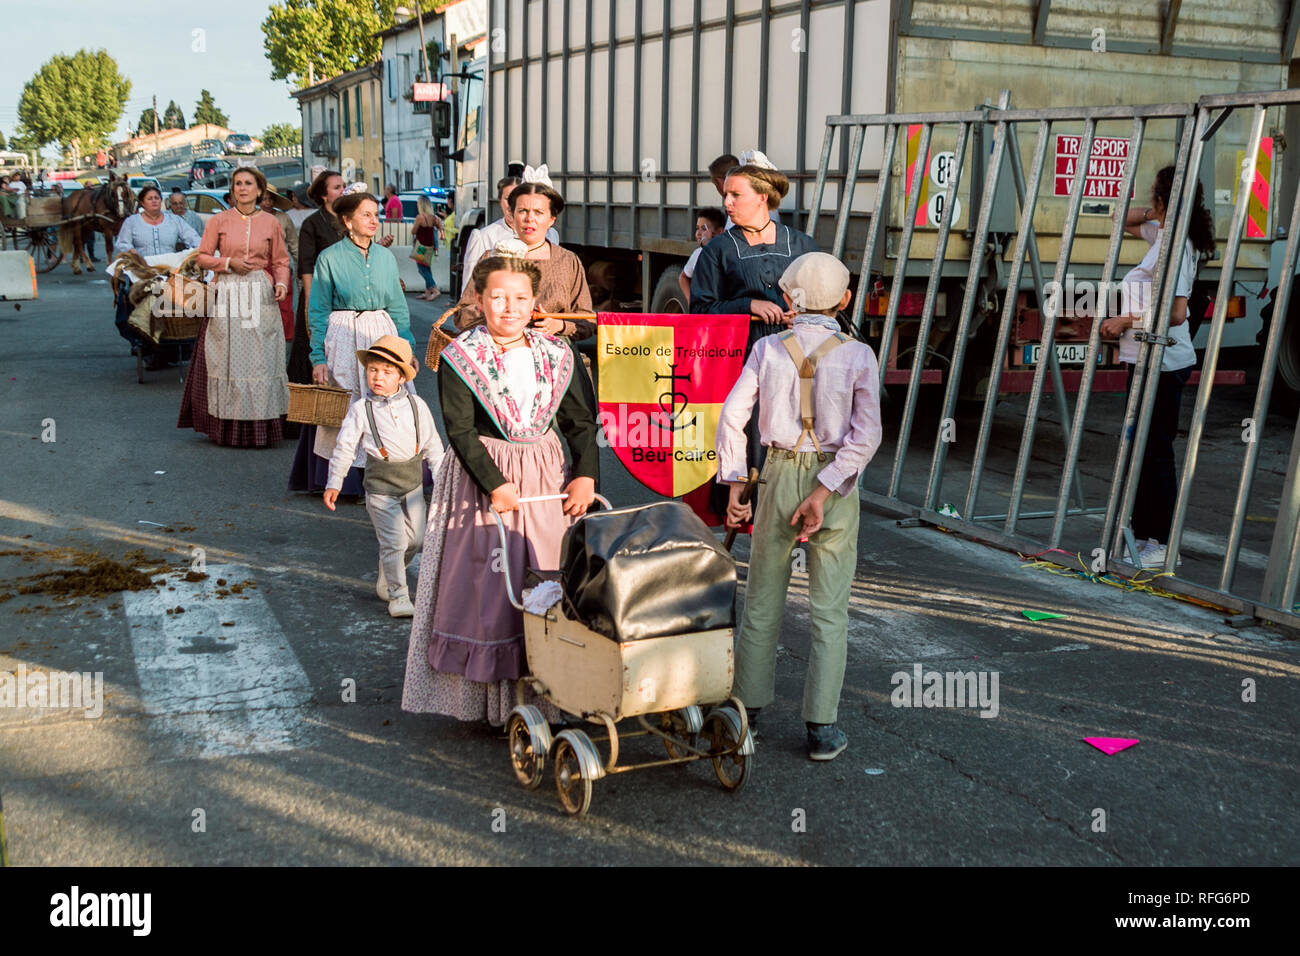 Women and children in traditonal costumes in the Old School Parade at the Annual Fete, Saint Gilles, Gard, France Stock Photo